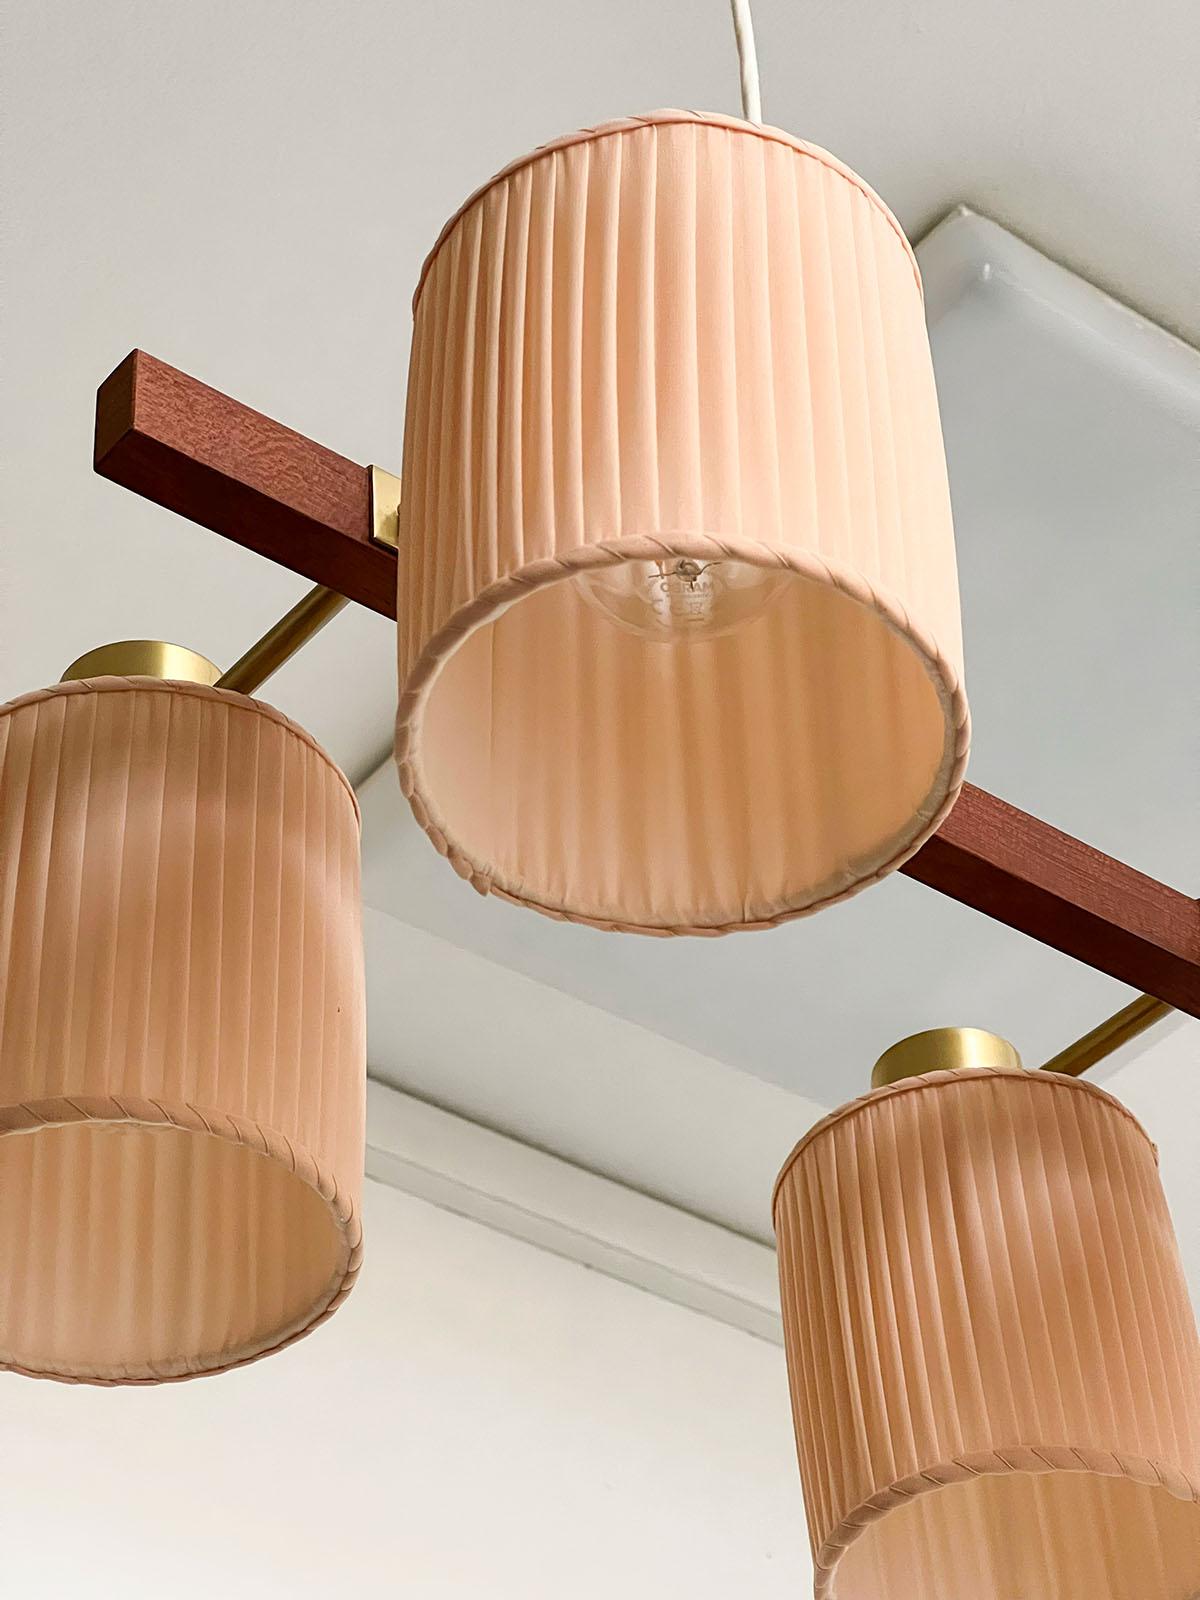 Rare 6-arm brass and teak ceiling lamp, model SP11/6, designed by Hans Bergström and produced by Ateljé Lyktan in Sweden, 1950s.

The lamp consists of a teak frame with three brass arms, each holding two light sources. The lamp shades are made of